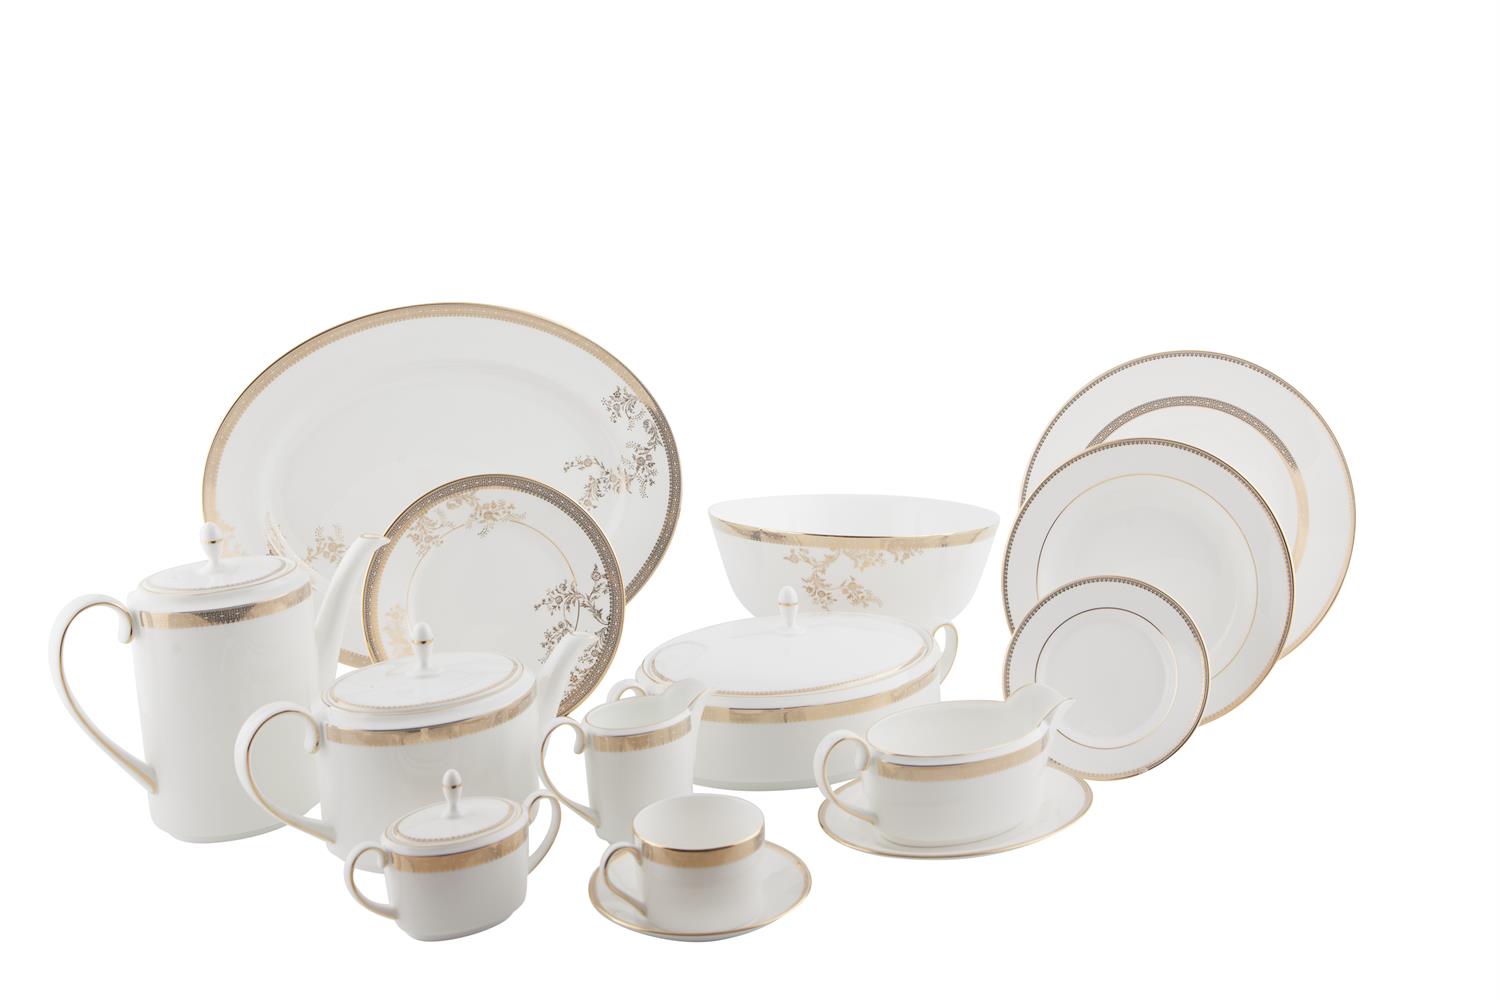 A LARGE VERA LACE GOLD DINNER SERVICE BY VERA WANG FOR WEDGWOOD, to seat ten, and comprising:- 10